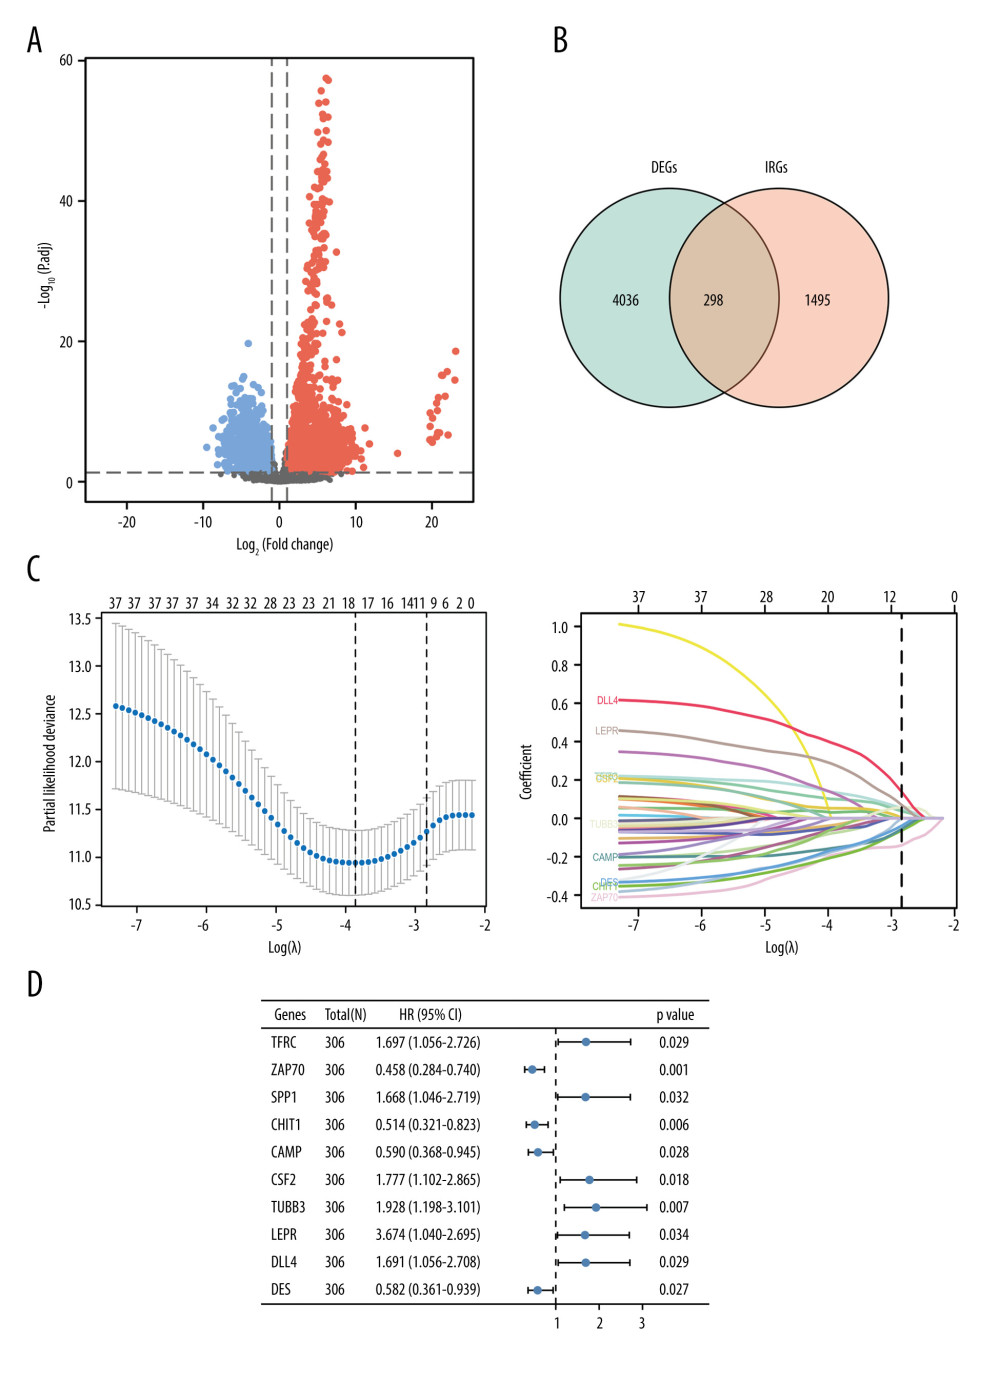 Identification of immune-related genes in cervical cancer.(A) Volcano plot of the differentially expressed genes between cervical cancer and normal tissue. Red points represented the significantly up-regulated genes, while blue points represent the significantly down-regulated genes (adjusted P<0.05). (B) Venn diagram to identify the overlapping genes between differentially expressed genes and immune-related genes. (C) Cross-validation plot for tuning the penalty parameter lambda in the LASSO model. LASSO coefficient profile plot of hub immune-related genes. (D) Forest plot of univariate Cox proportional hazards regression analysis for 10 hub immune-related genes expression and overall survival.